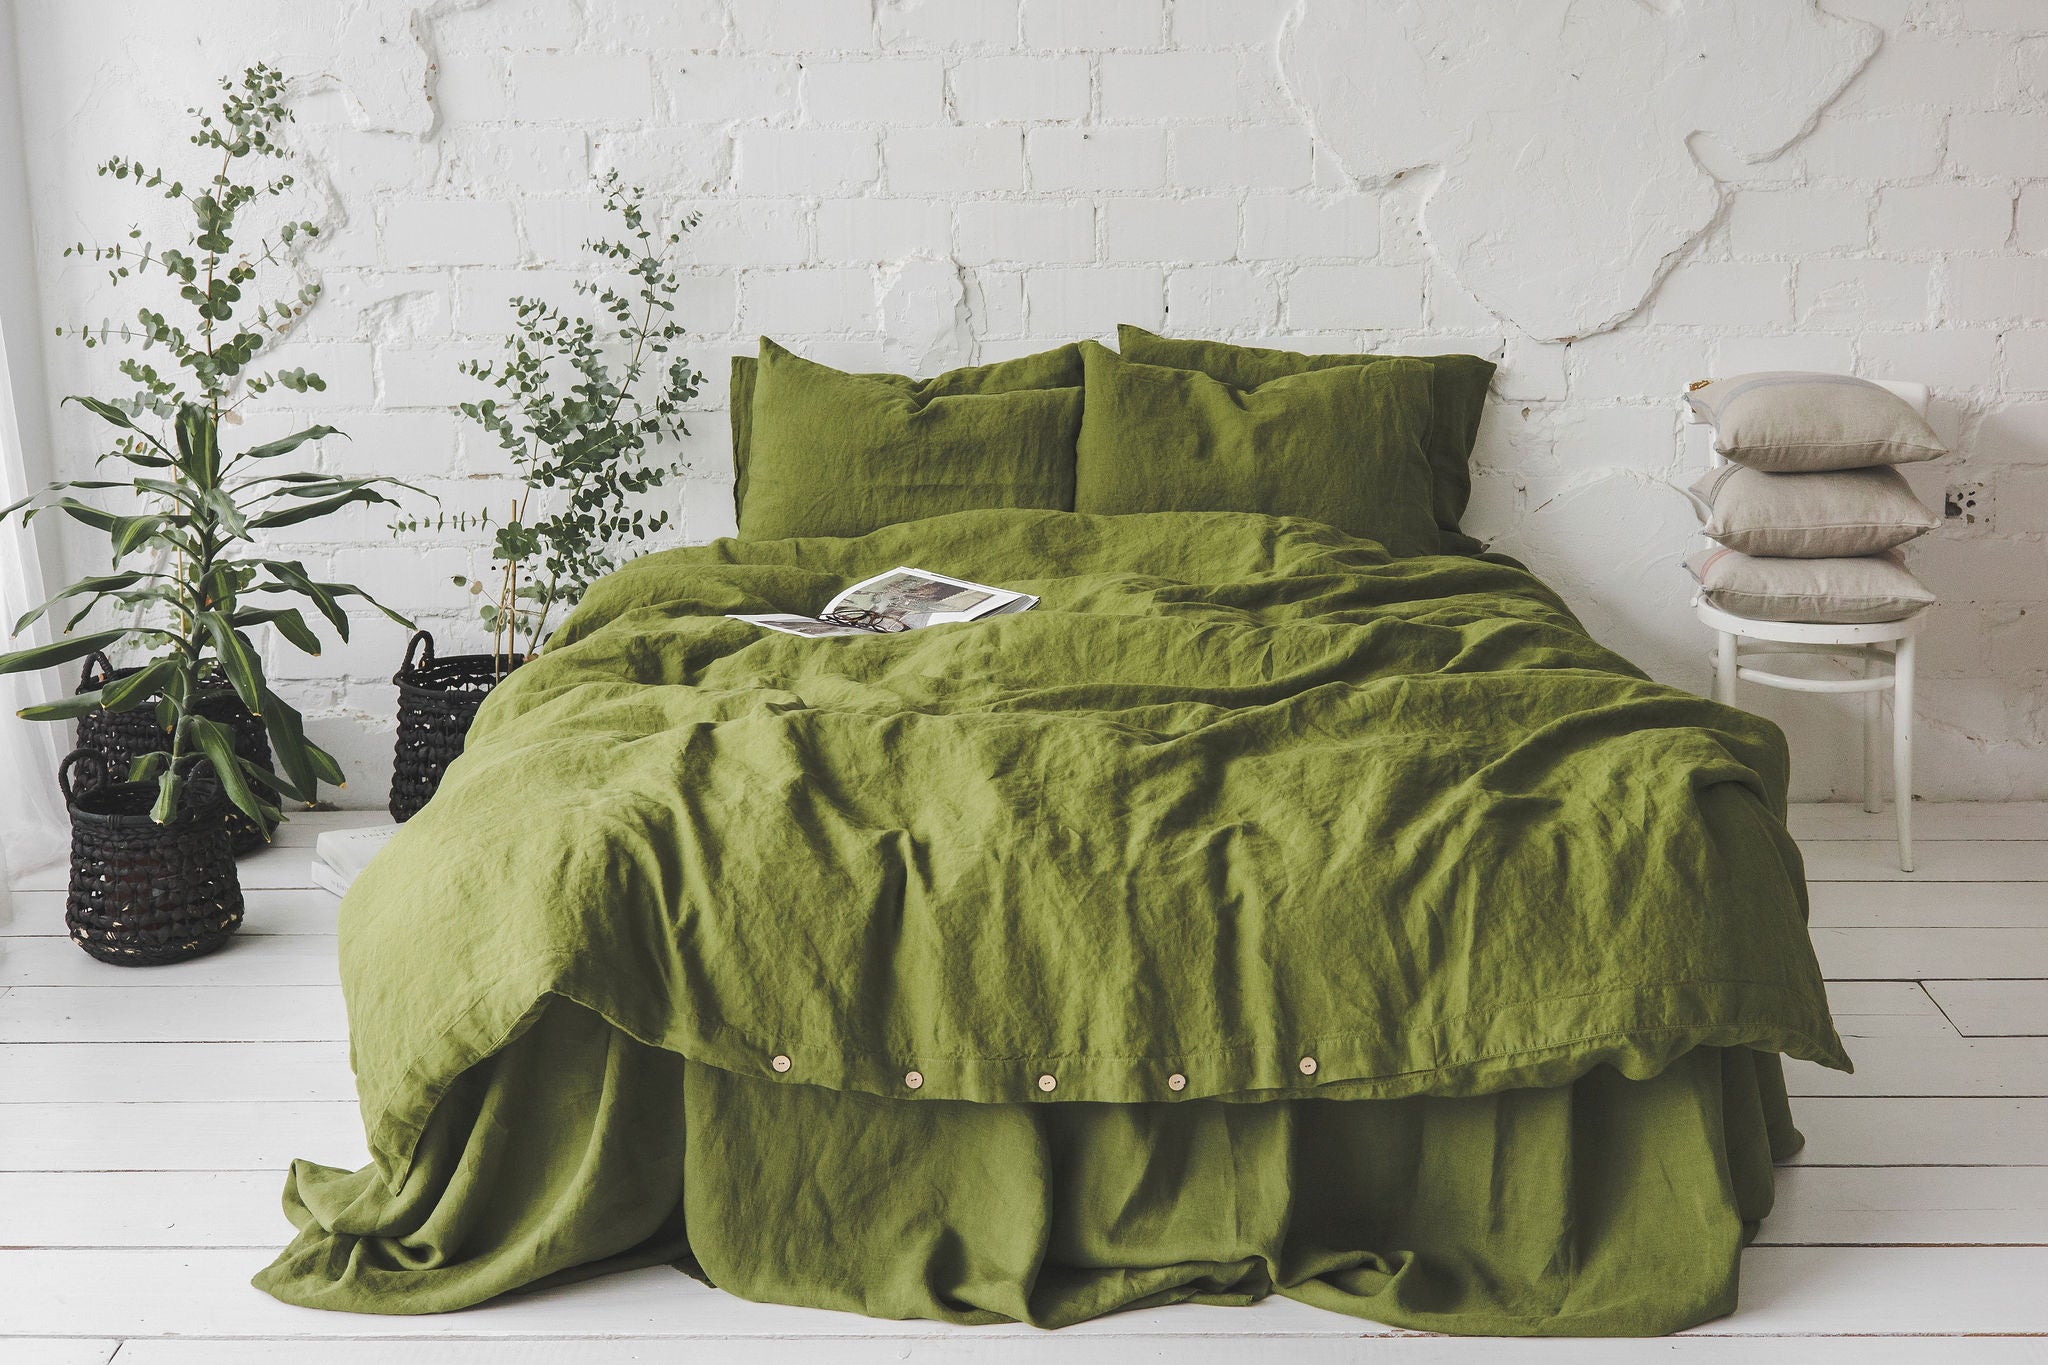 beautifully made bed with a matching linen bedding set all in a rich green moss color